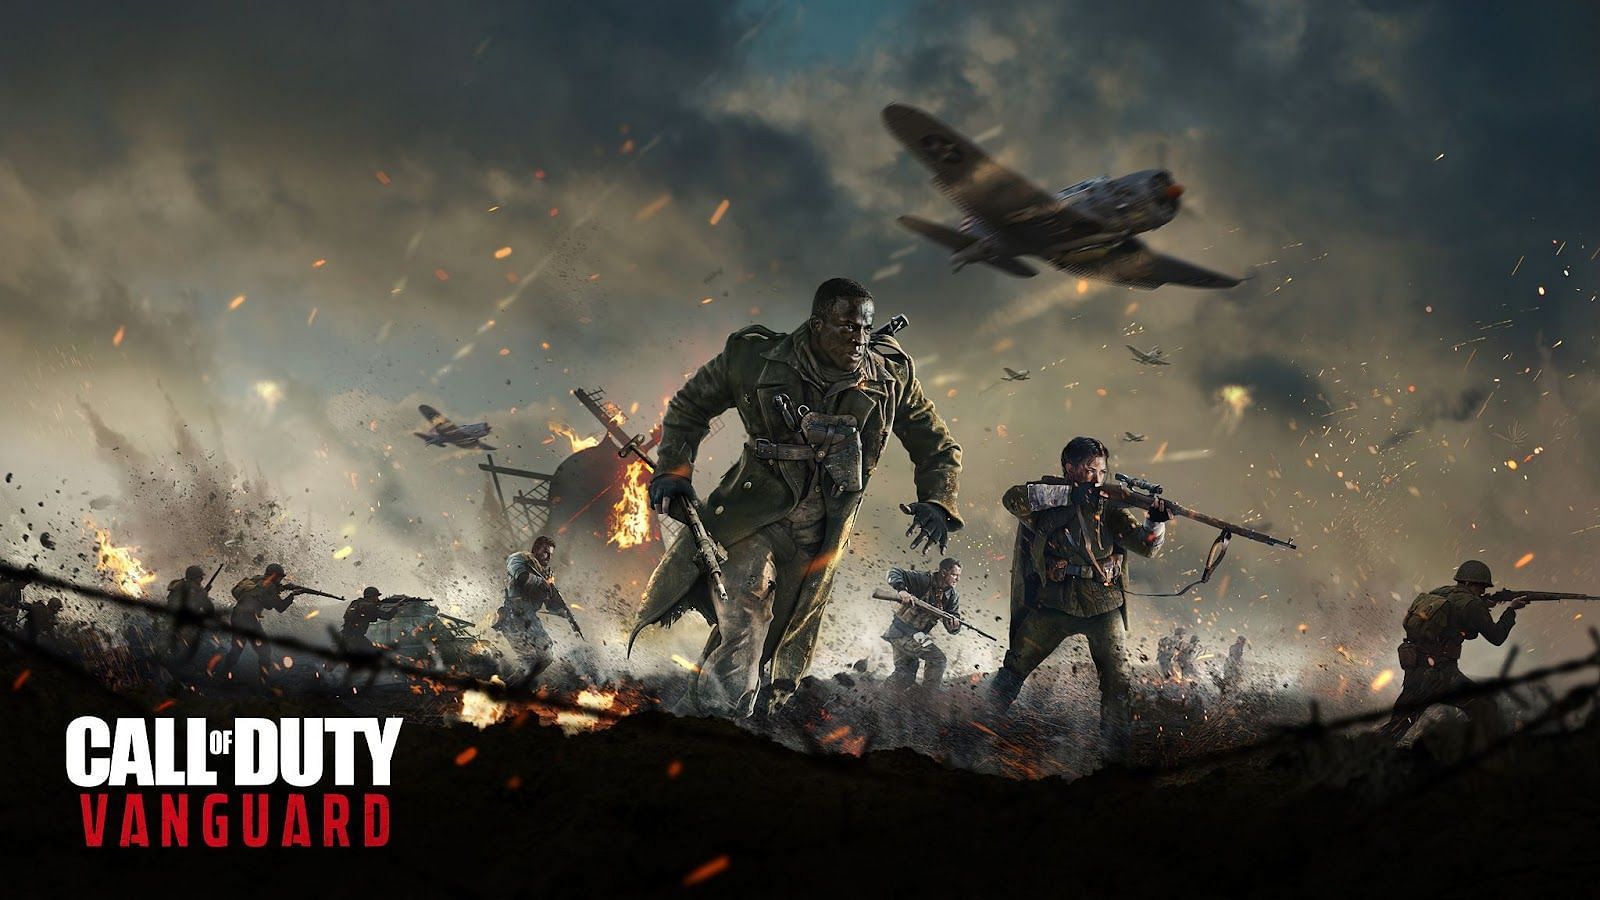 Call of Duty: Vanguard is finally out for players to enjoy (Image by Activision)